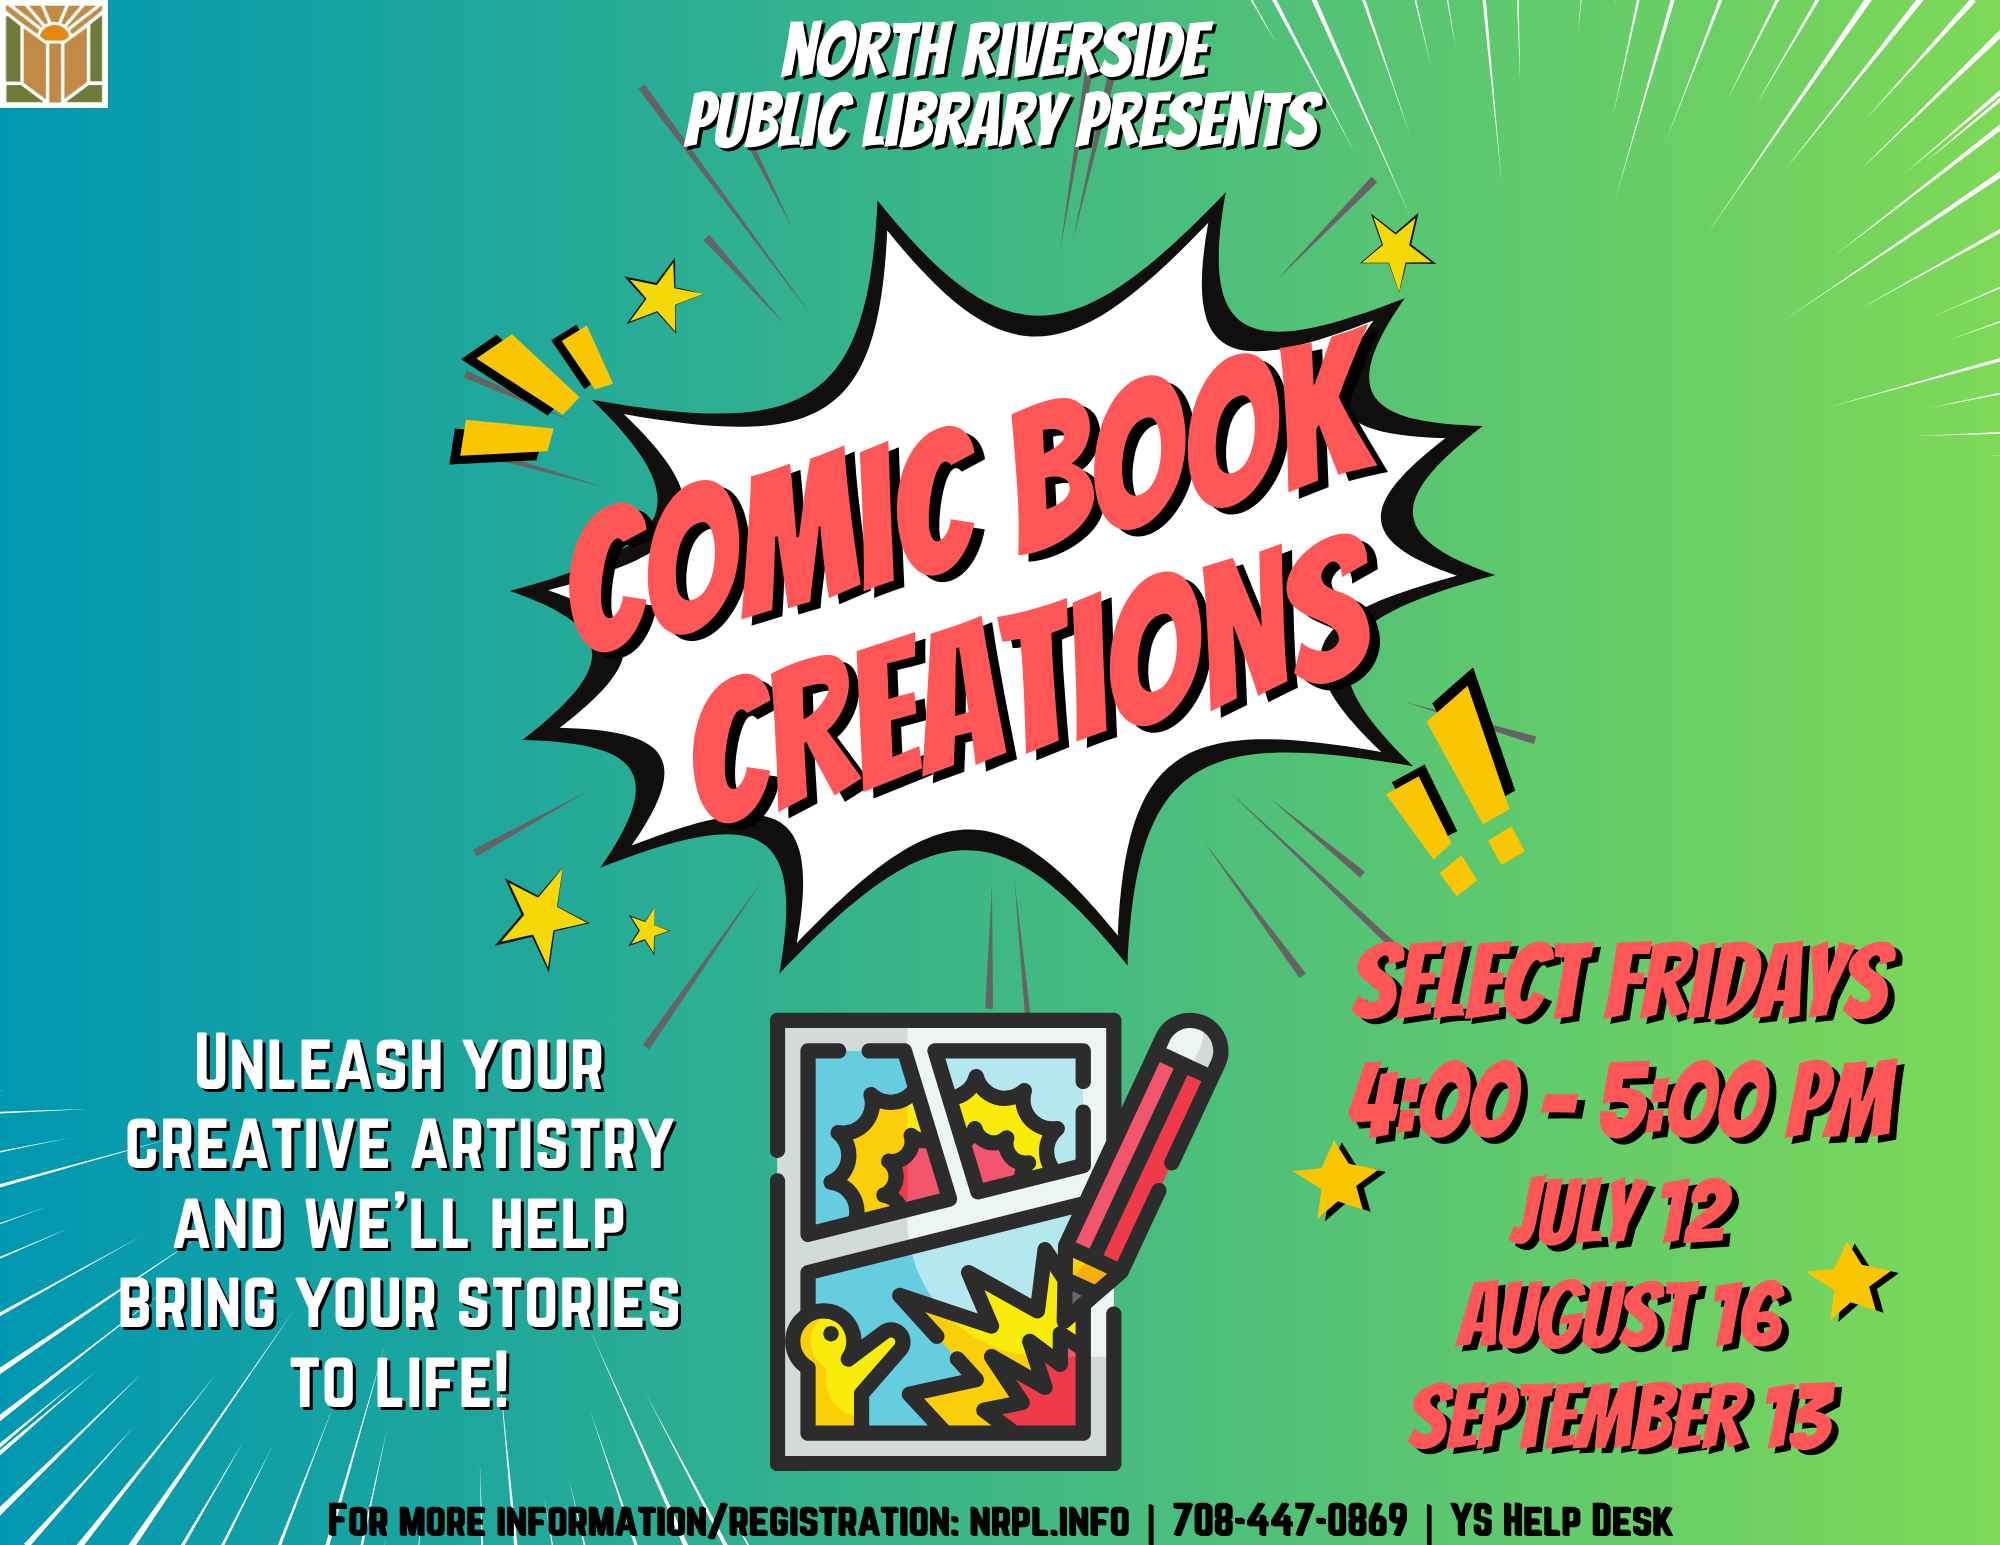 Comic Book Creations. Select Fridays 4 – 5 pm. July 12, August 16, & September 13. Unleash your creative artistry and we’ll help bring your stories to life! For rising 3rd graders to rising 5th graders.